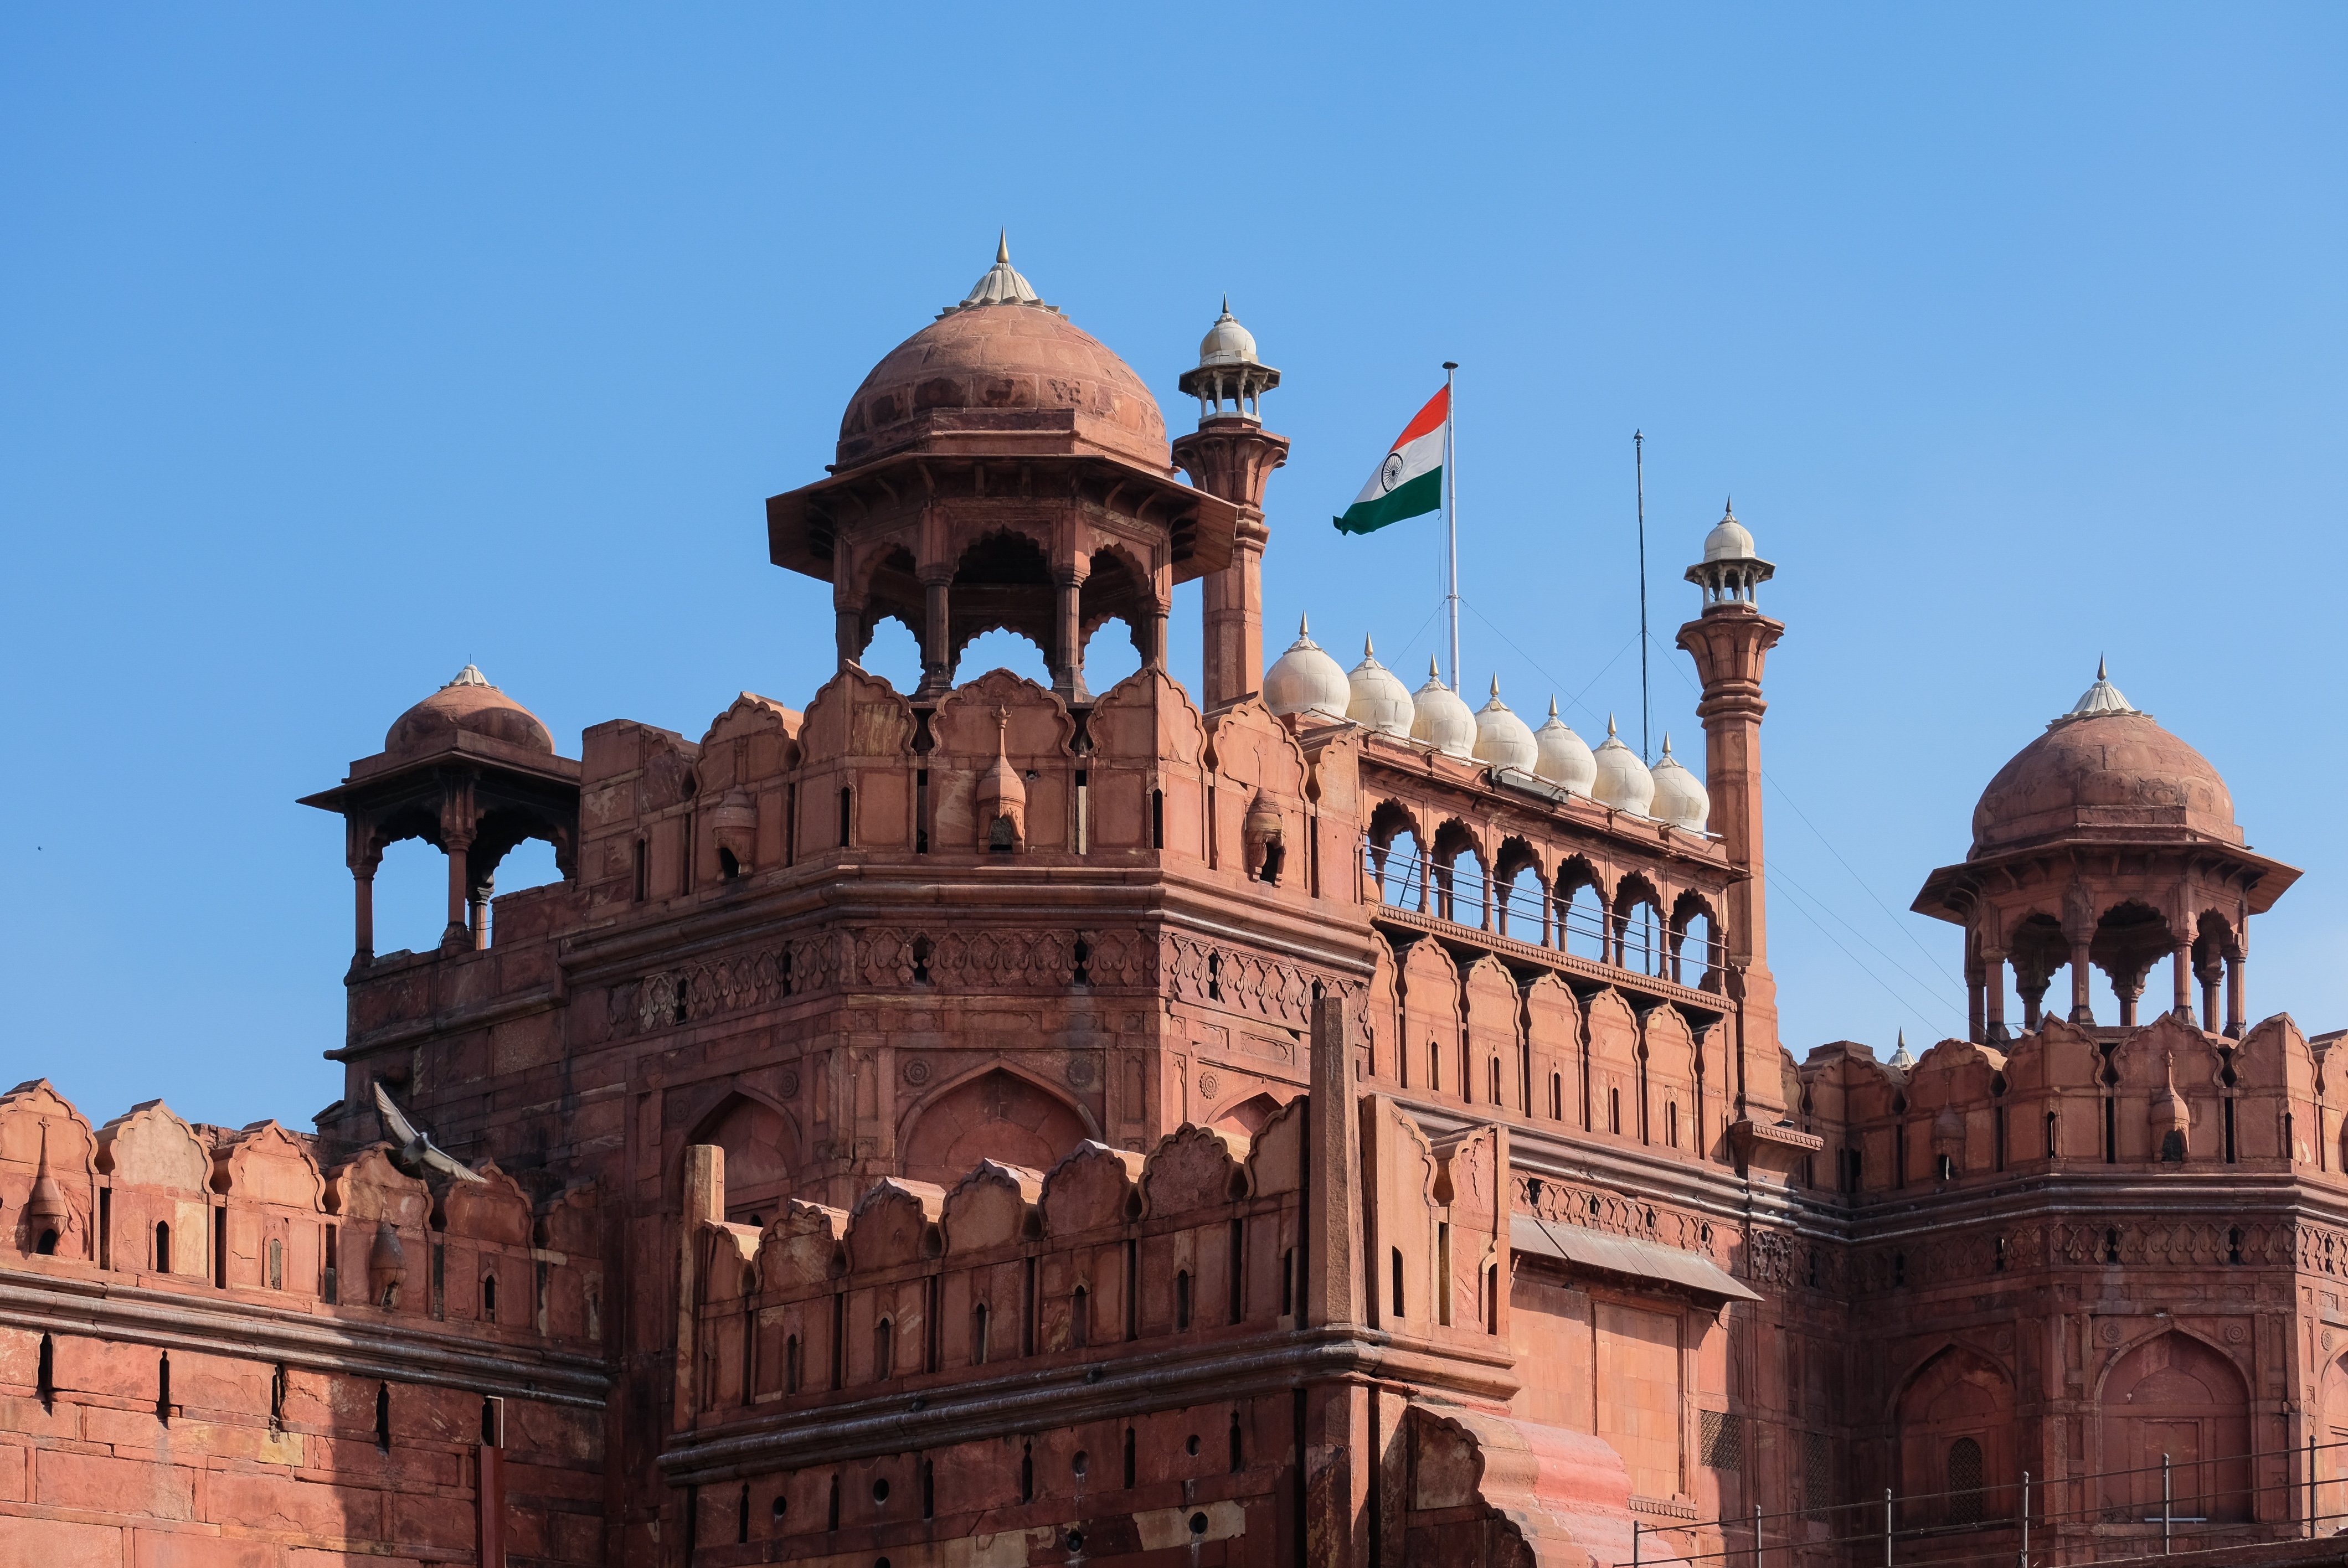 Red Fort, Delhi Photo. Download free image from Mystock